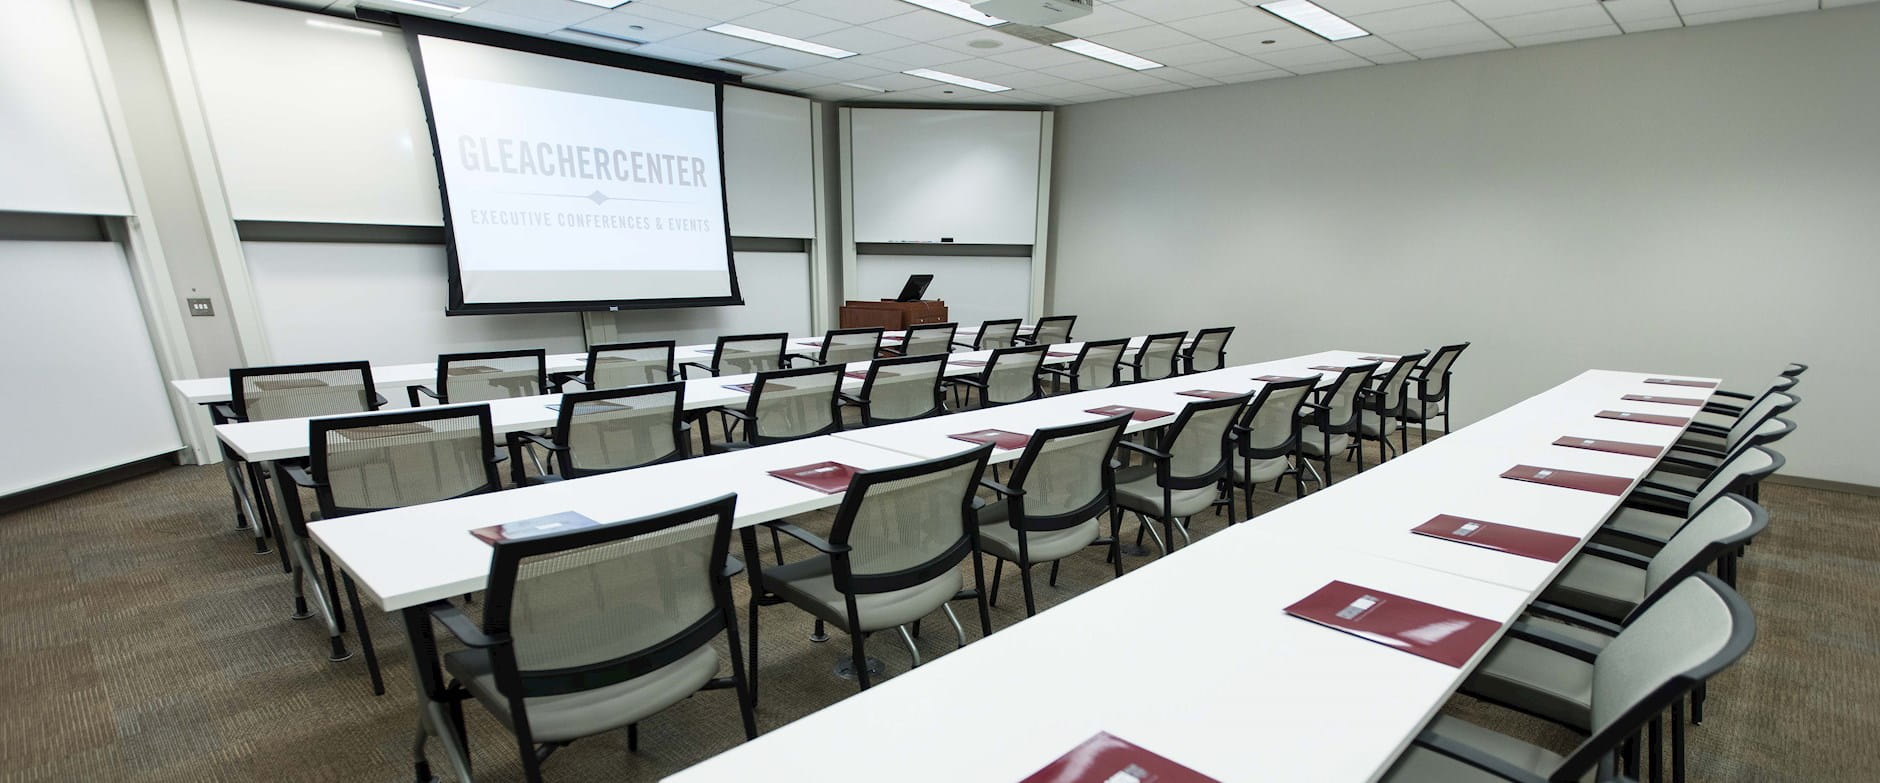 Multi-function room at the University of Chicago Gleacher Center with four rows of tables and chairs facing the projector screen